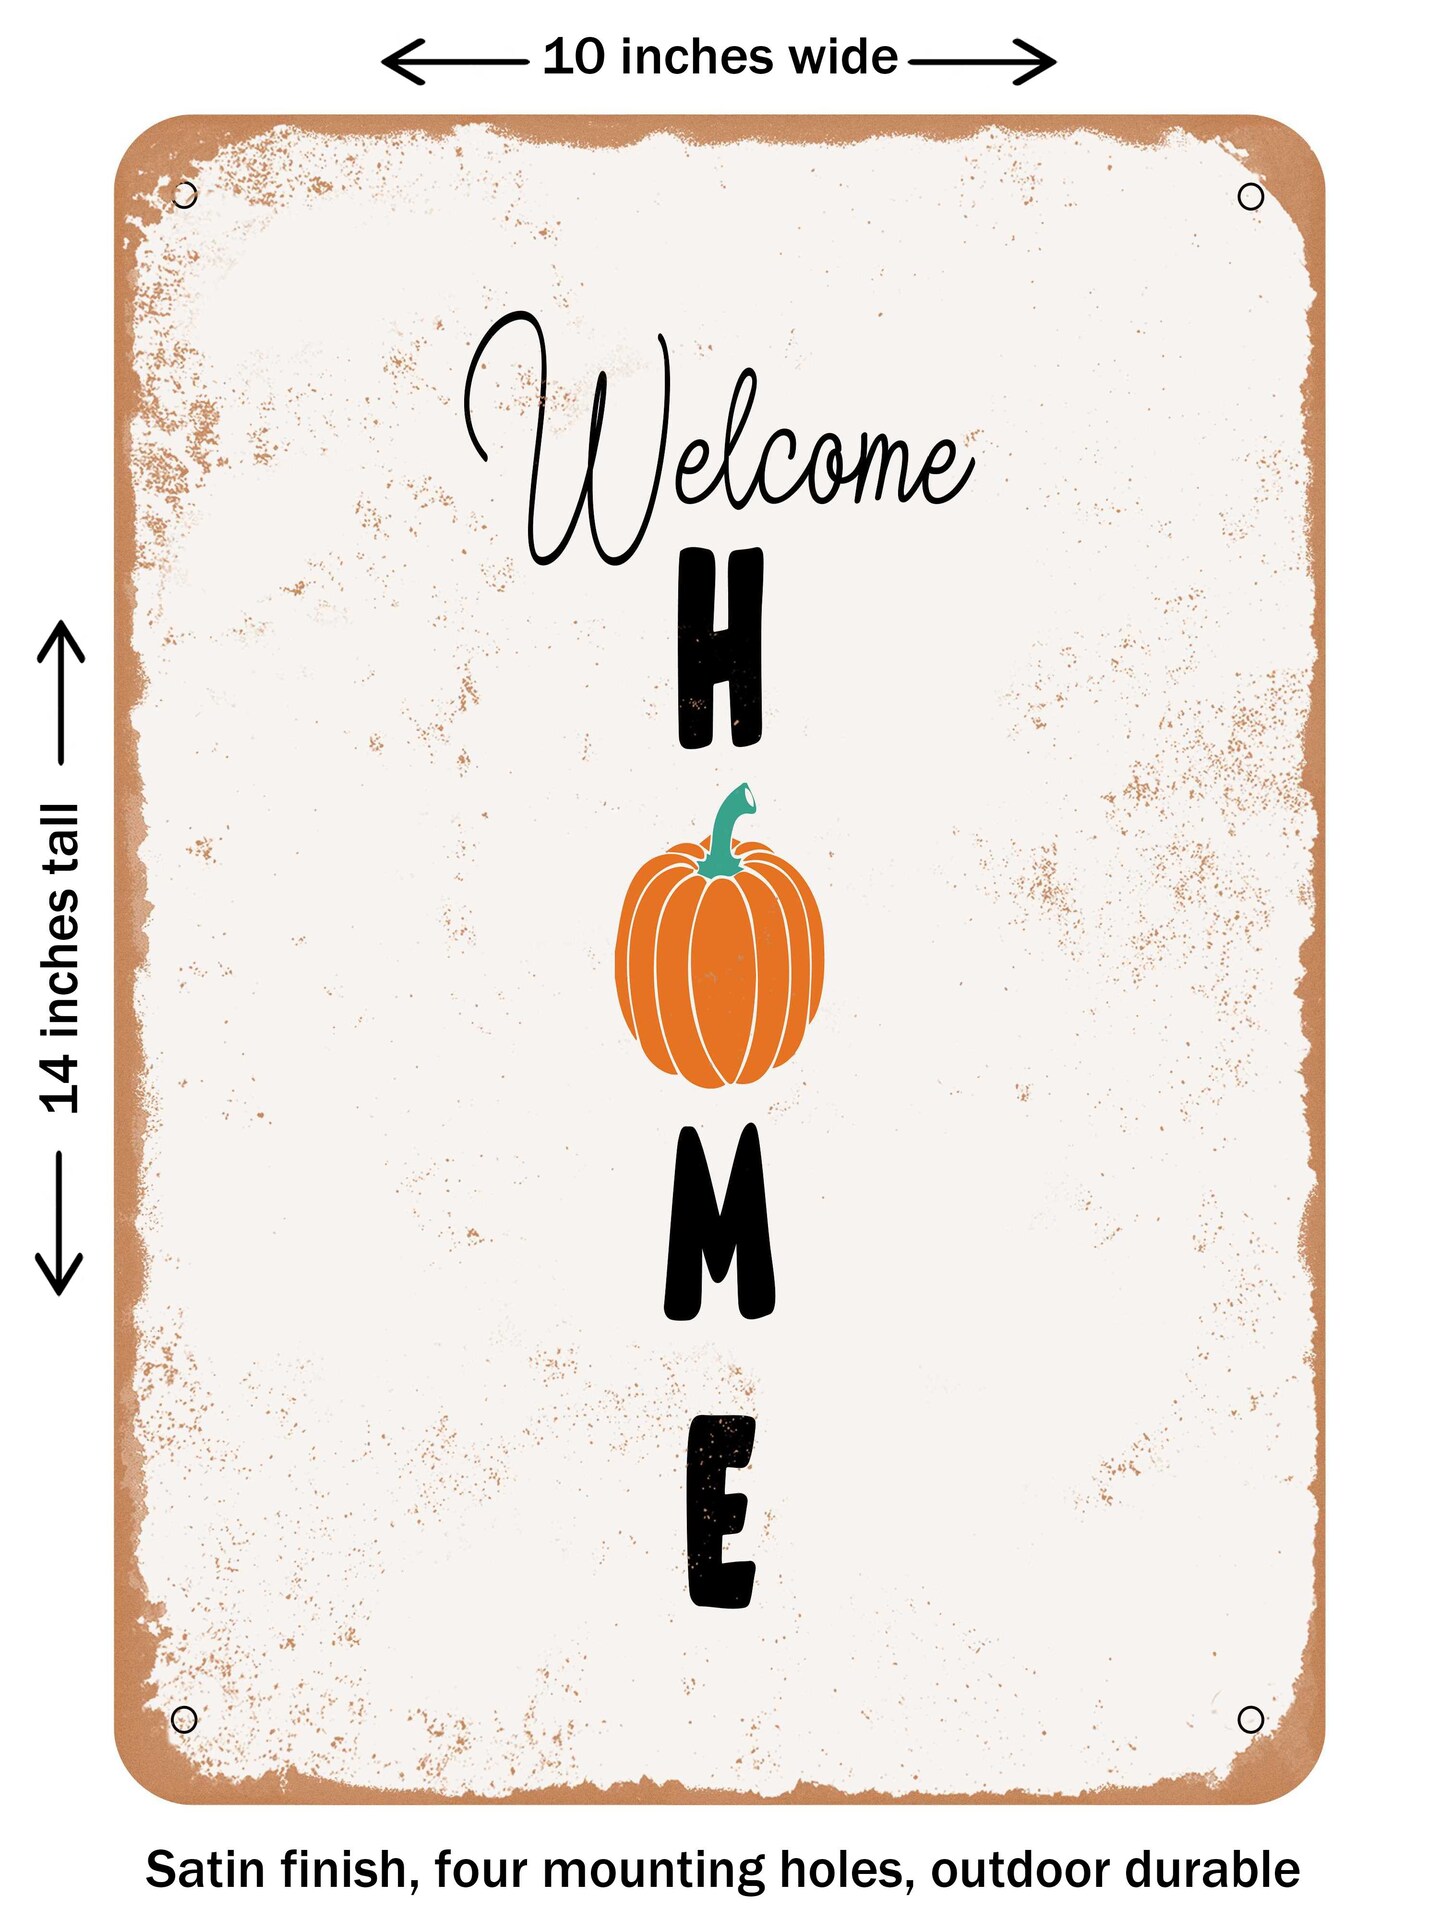 DECORATIVE METAL SIGN - Welcome Home  - Vintage Rusty Look